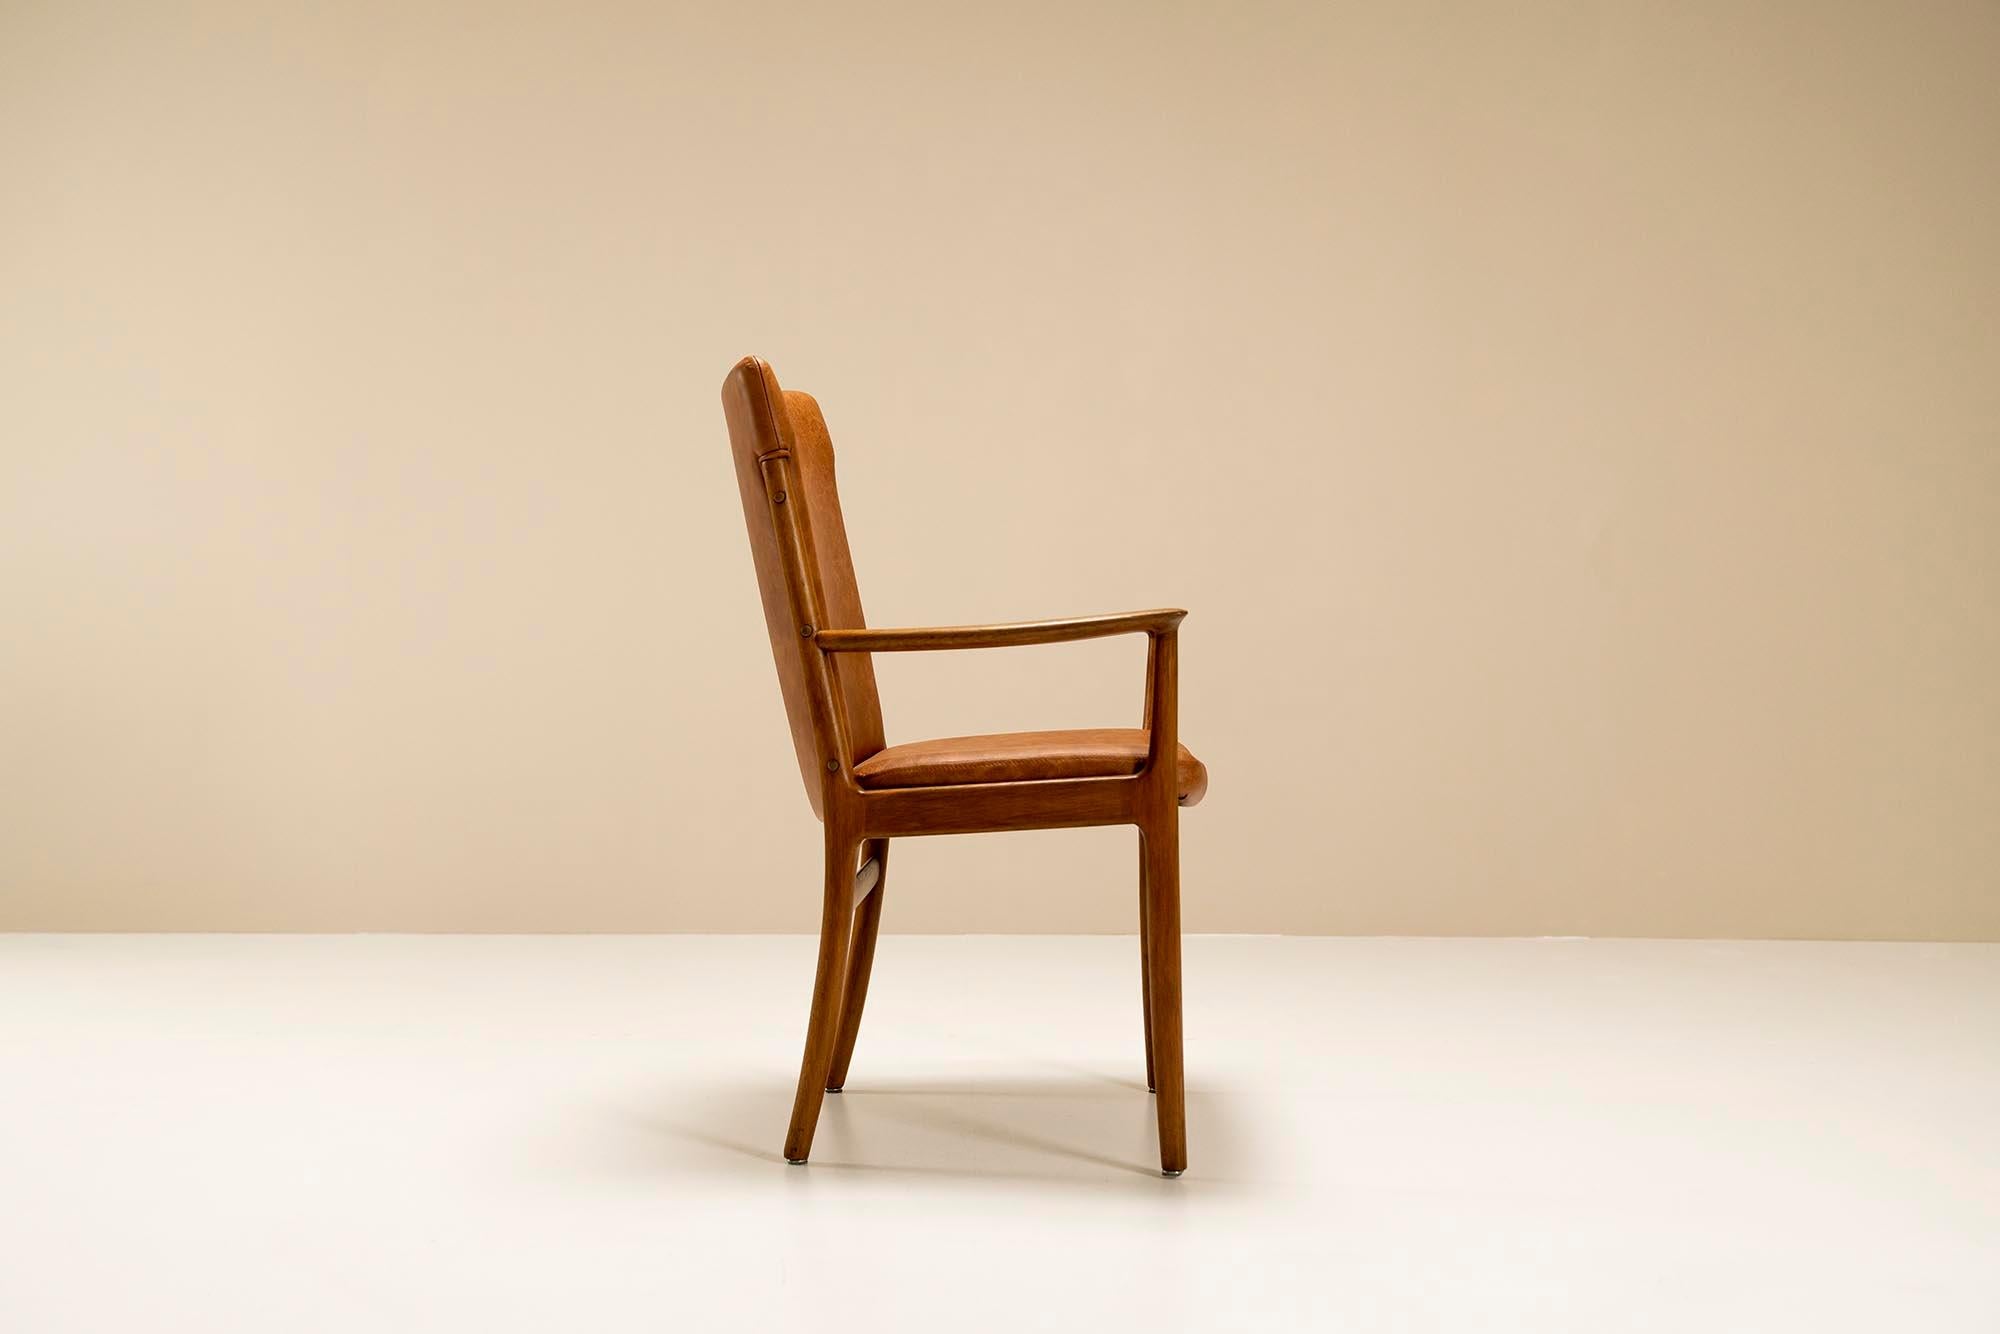 Four Armchairs in Ash Wood and Leather by Kai Lyngfeldt Larsen, Denmark, 1960s For Sale 2